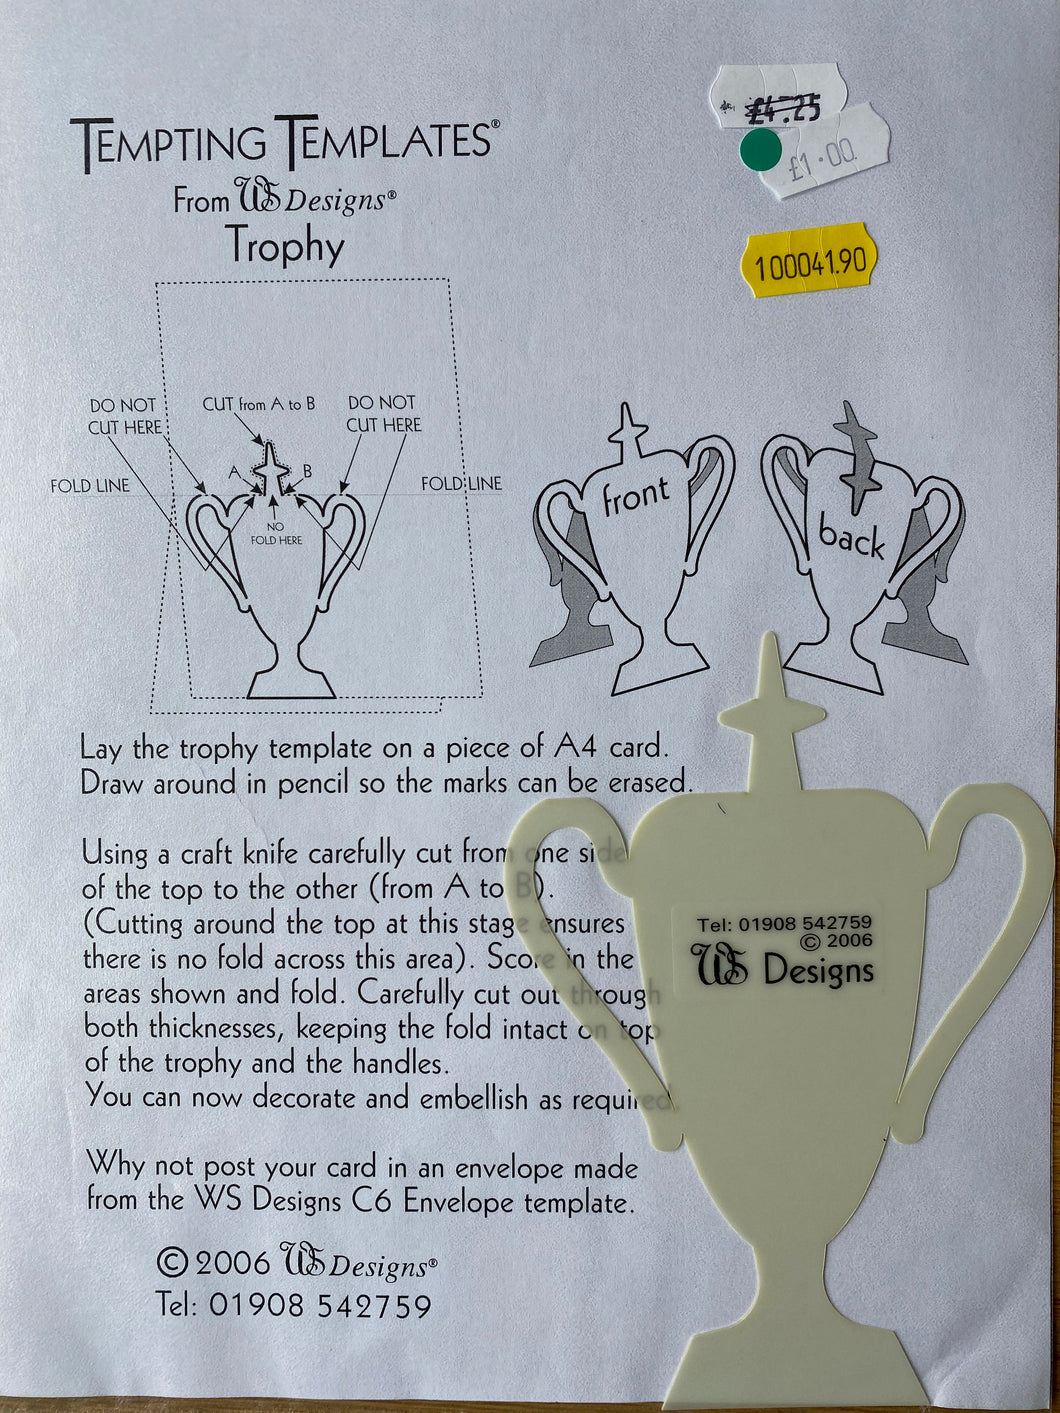 WS Designs Tempting Templates : Trophy